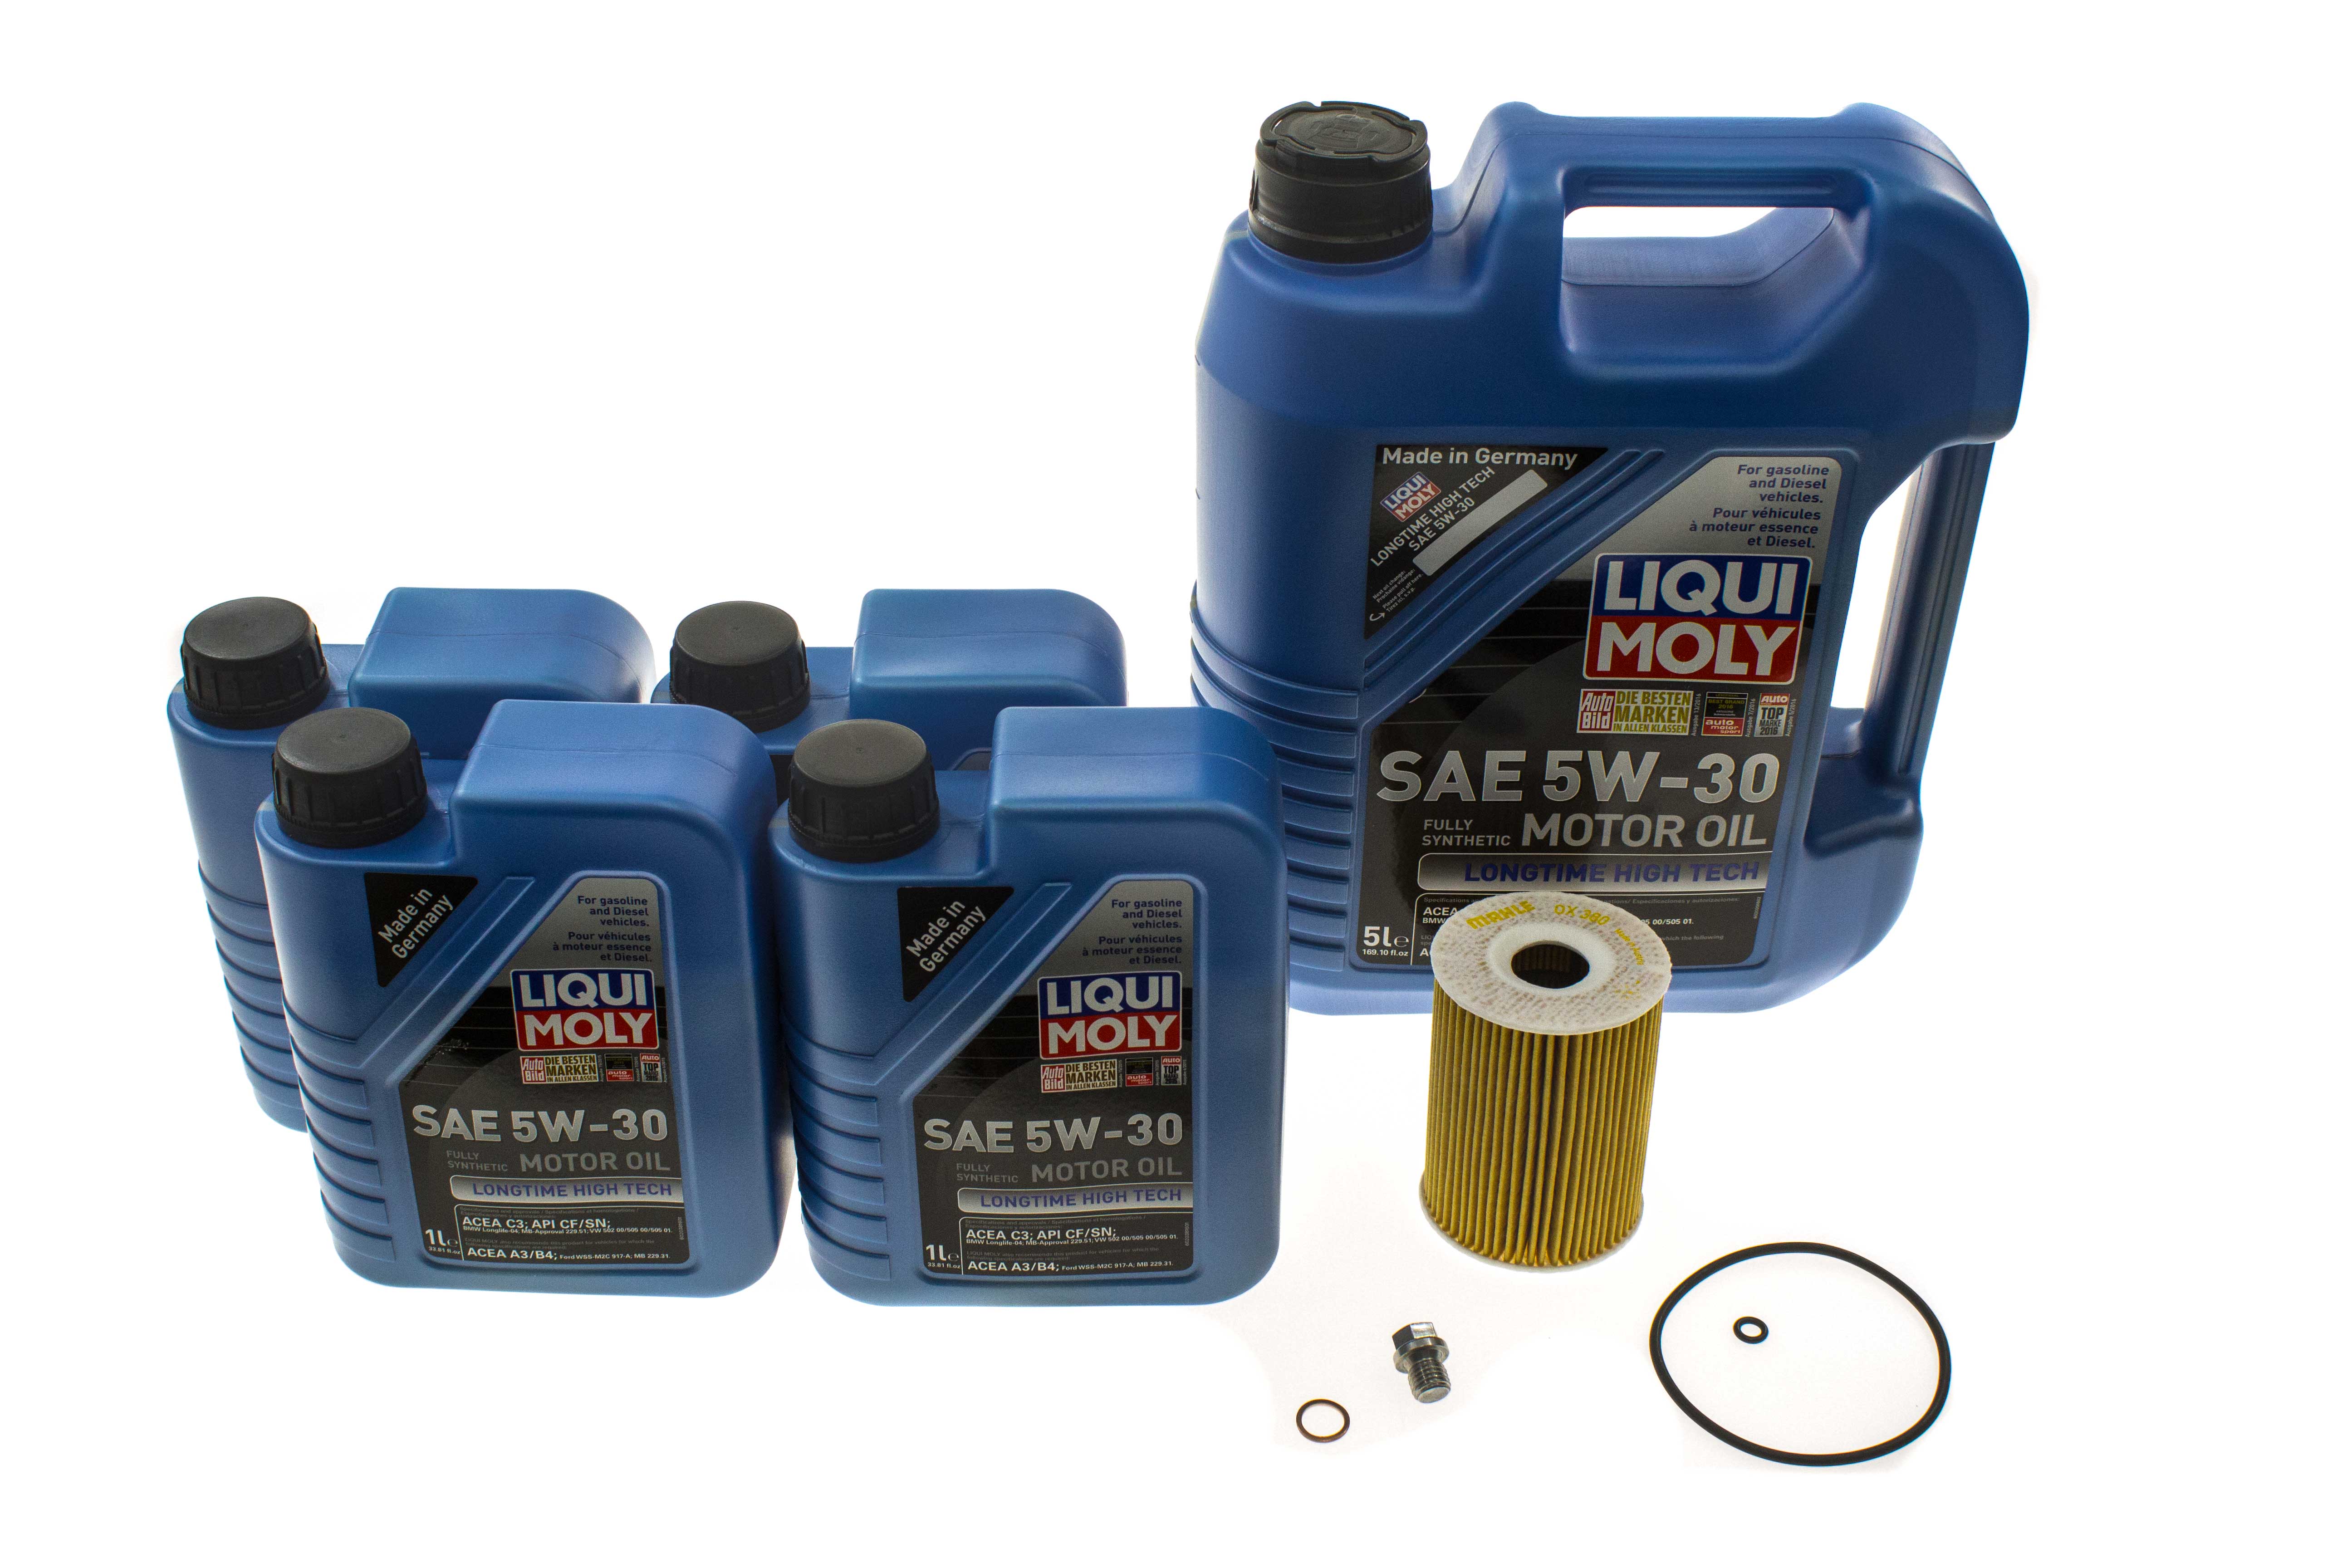 Liqui Moly Fully Synthetic Longtime High Tech 5W-30 Motor Oil - 5 Liter